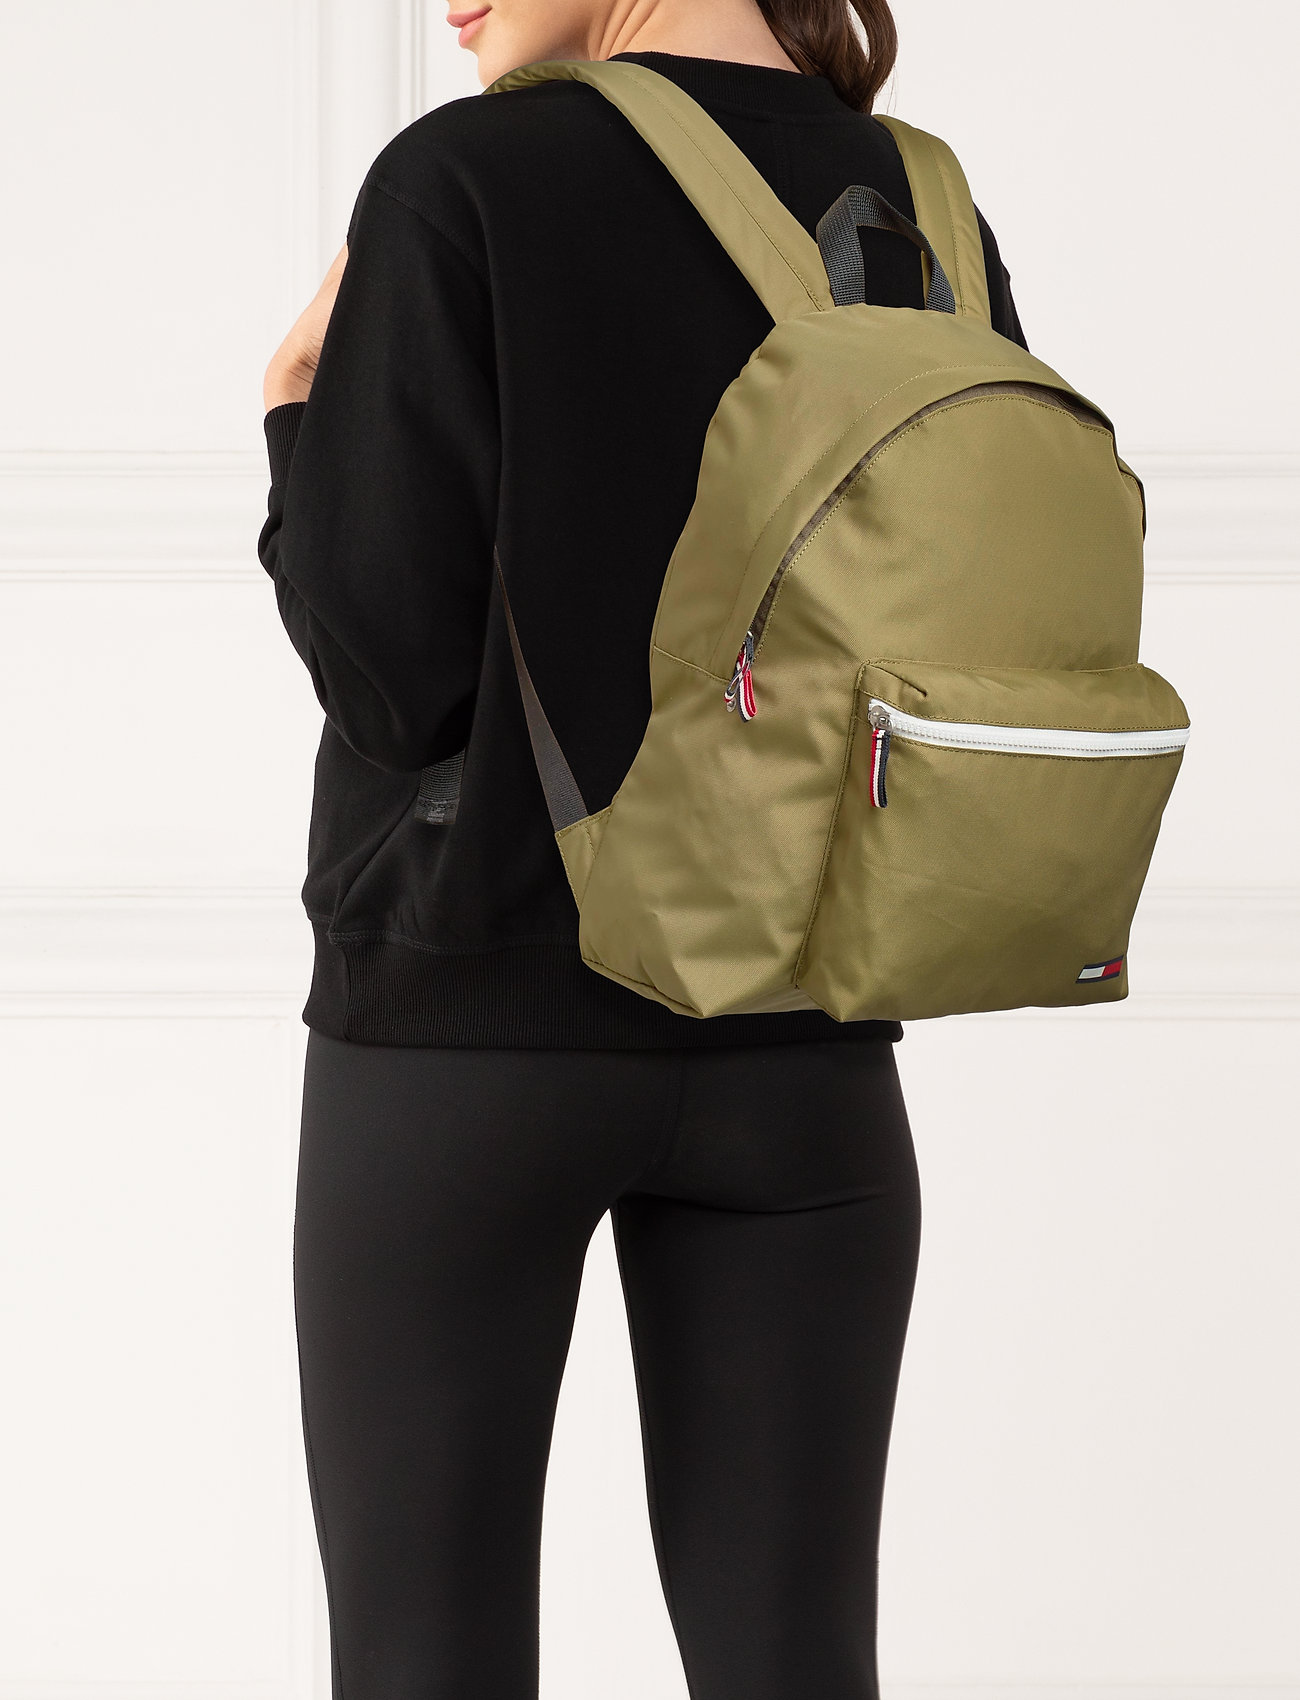 tommy jeans city backpack